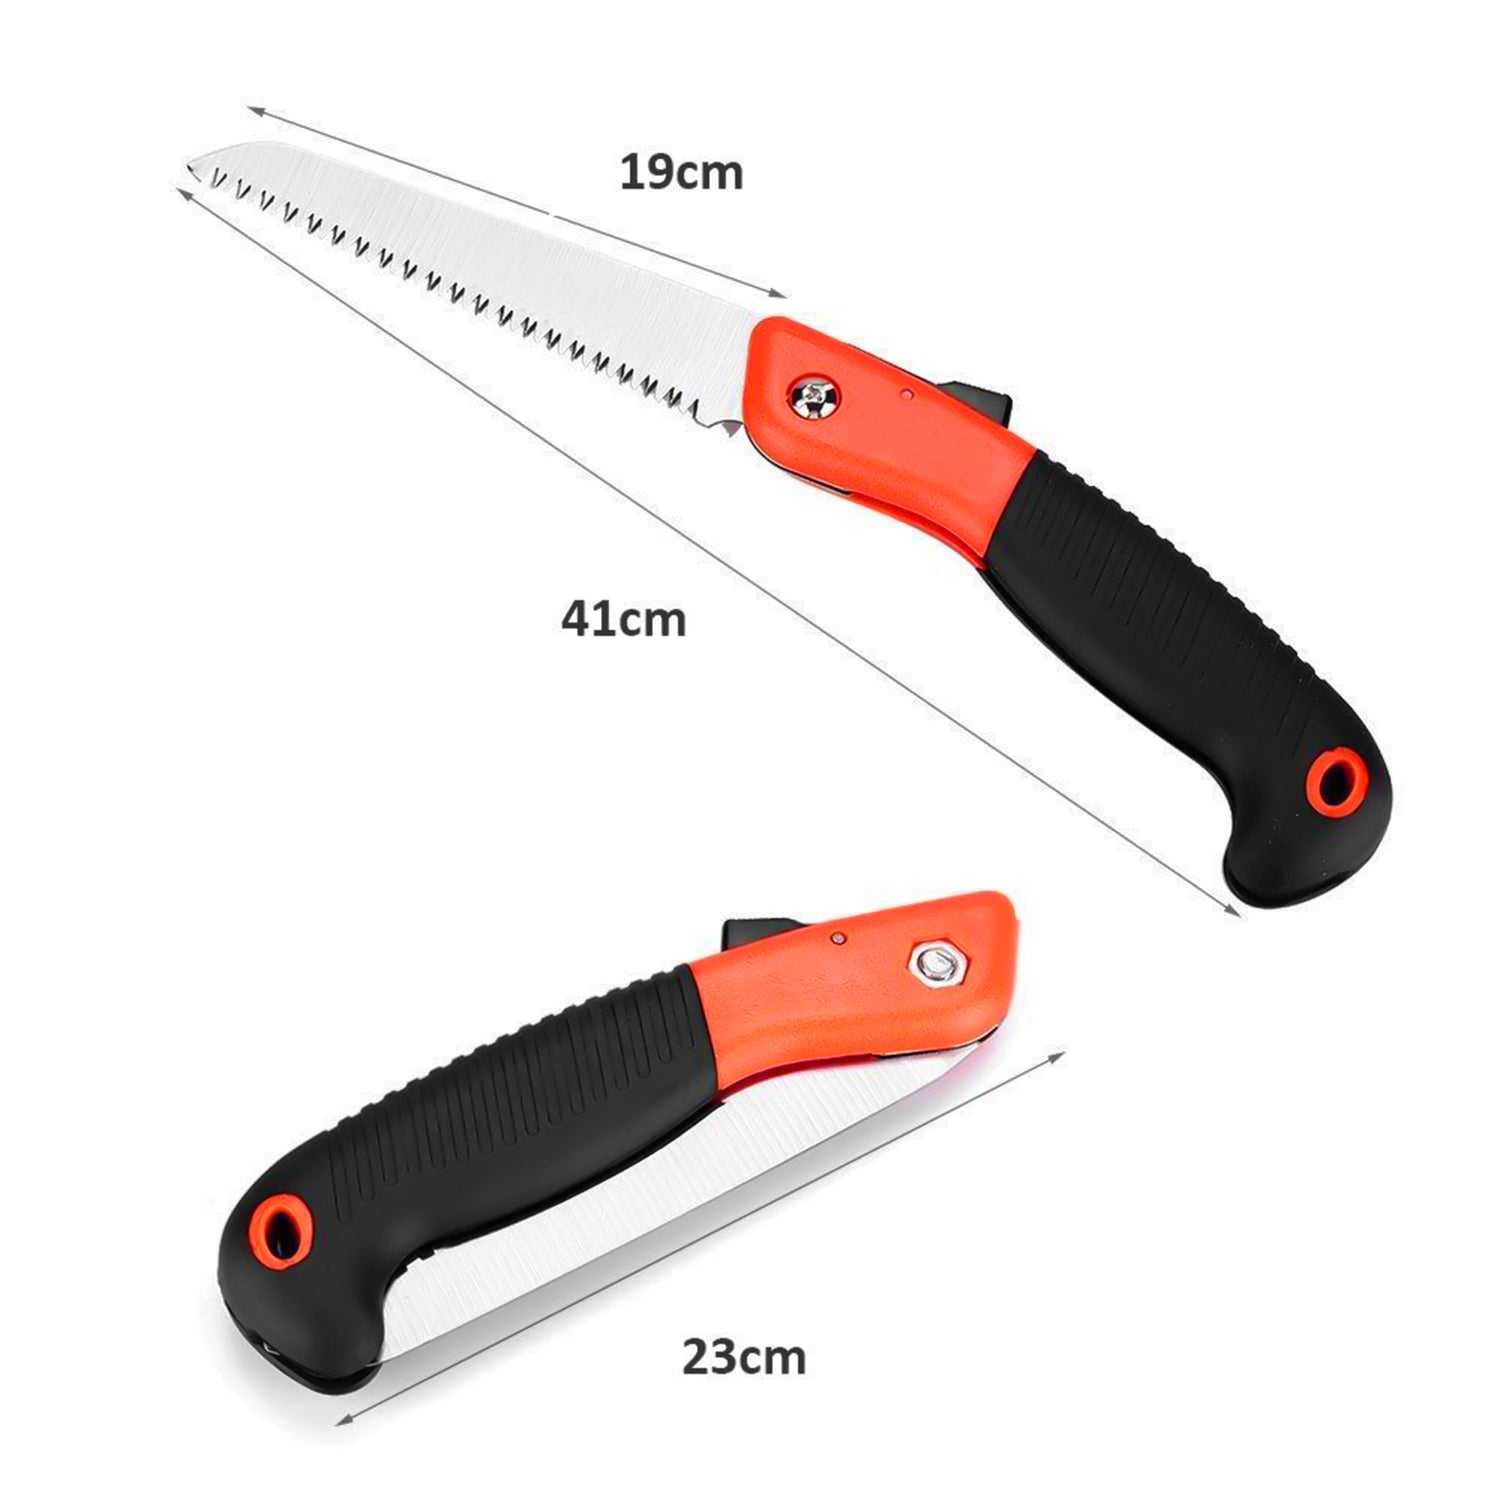 0464L FOLDING SAW FOR TRIMMING, PRUNING, CAMPING. SHRUBS AND WOOD DeoDap